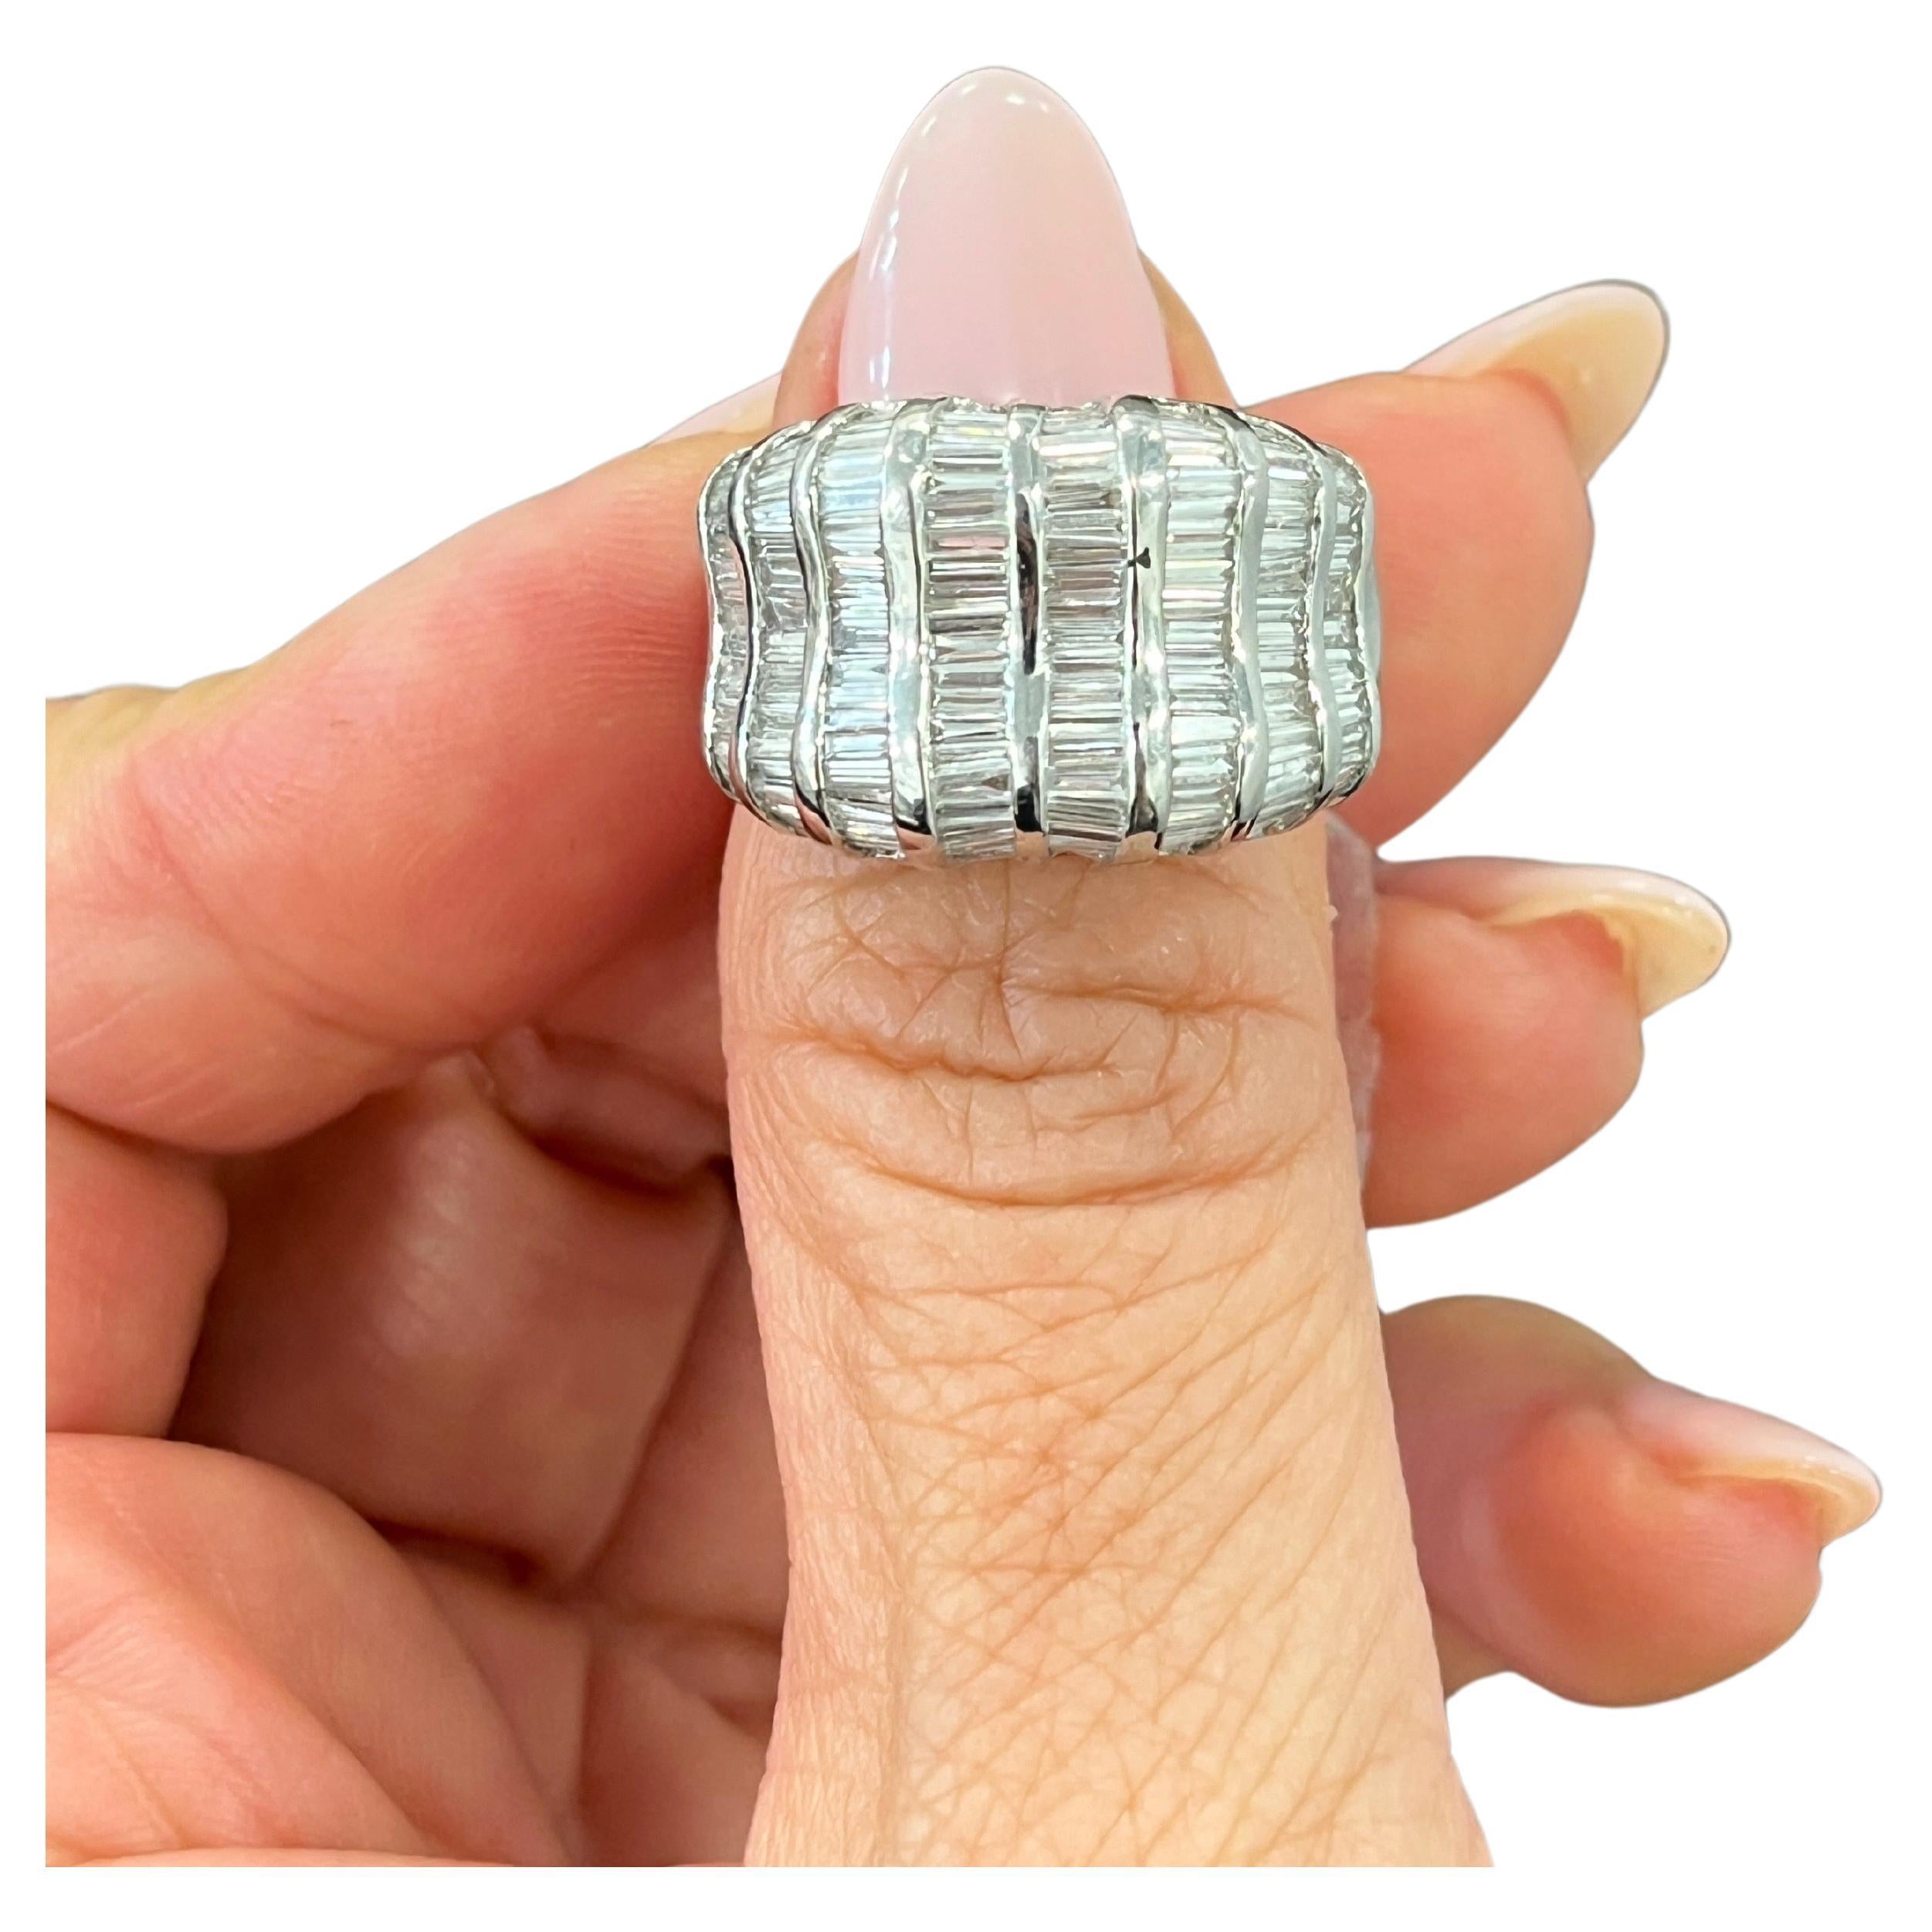 This exquisite ring is a stunning piece of fine jewelry that features a 3.48 carat baguette cut diamonds set in 18k white gold. The diamonds have a clarity grade of VS1/VS2 and a color grade of G/H, and is accented beautifully by the white gold